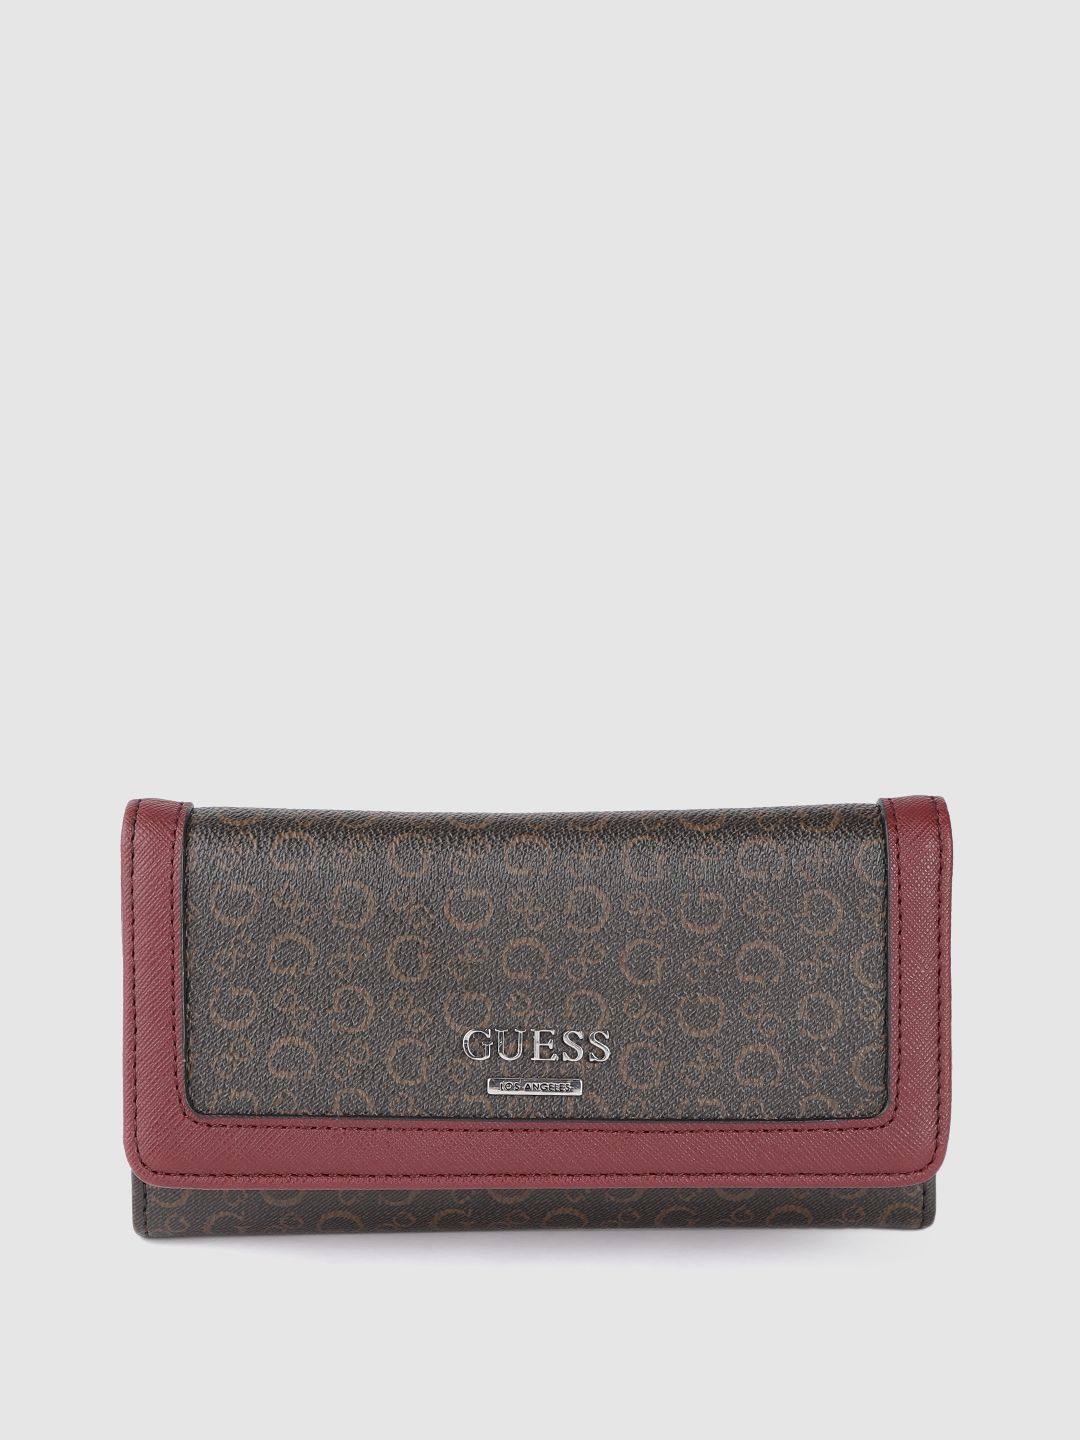 GUESS Women Coffee Brown & Maroon Brand Logo Print Three Fold Wallet Price in India